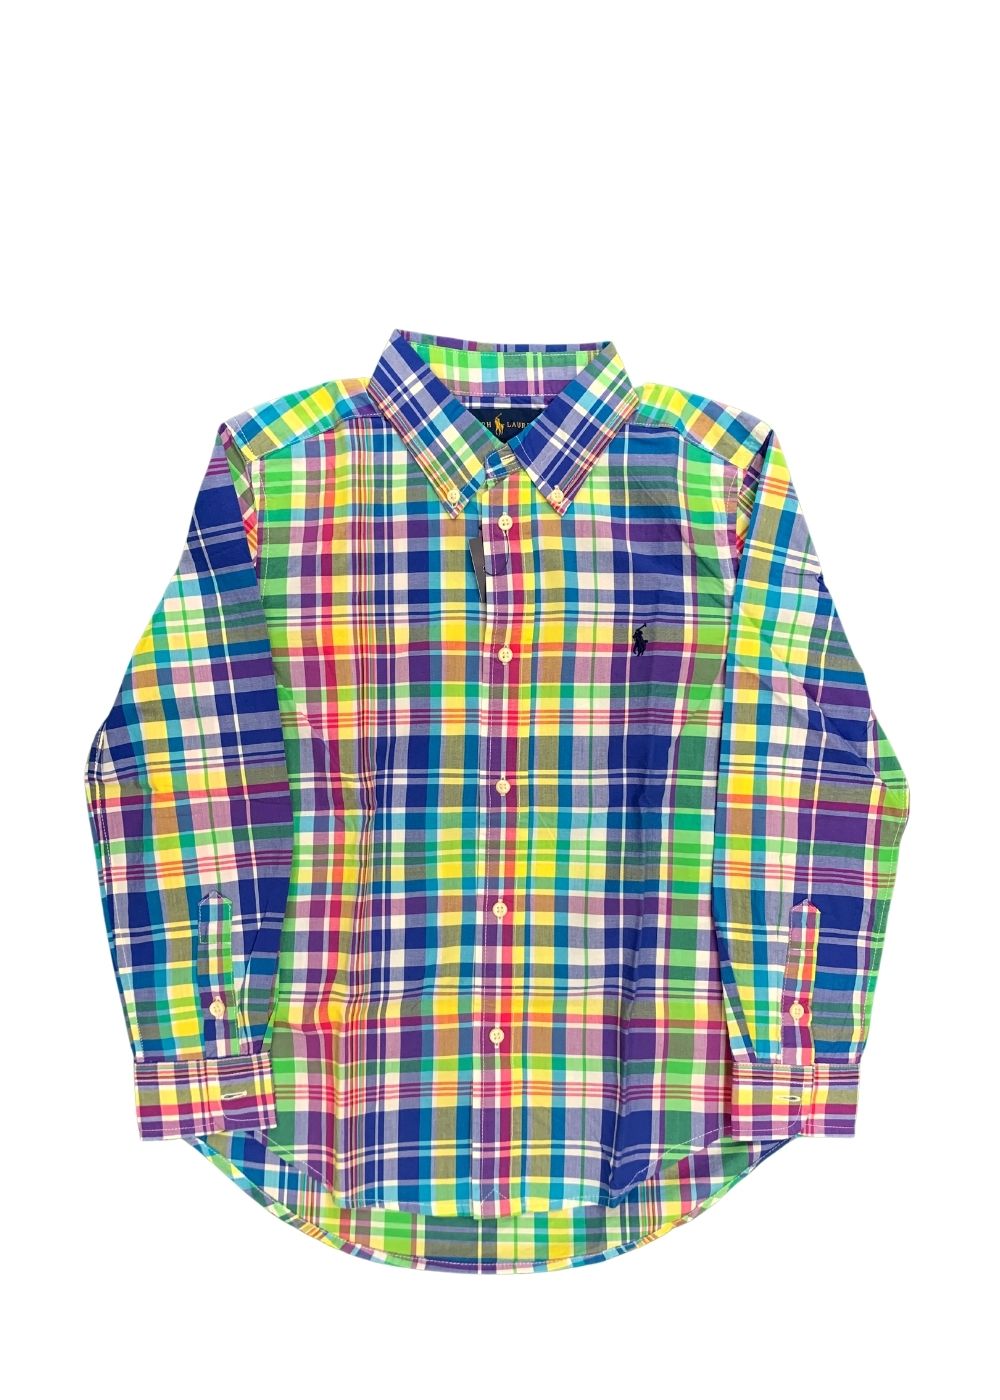 Featured image for “POLO RALPH LAUREN CAMICIA VINTAGE”